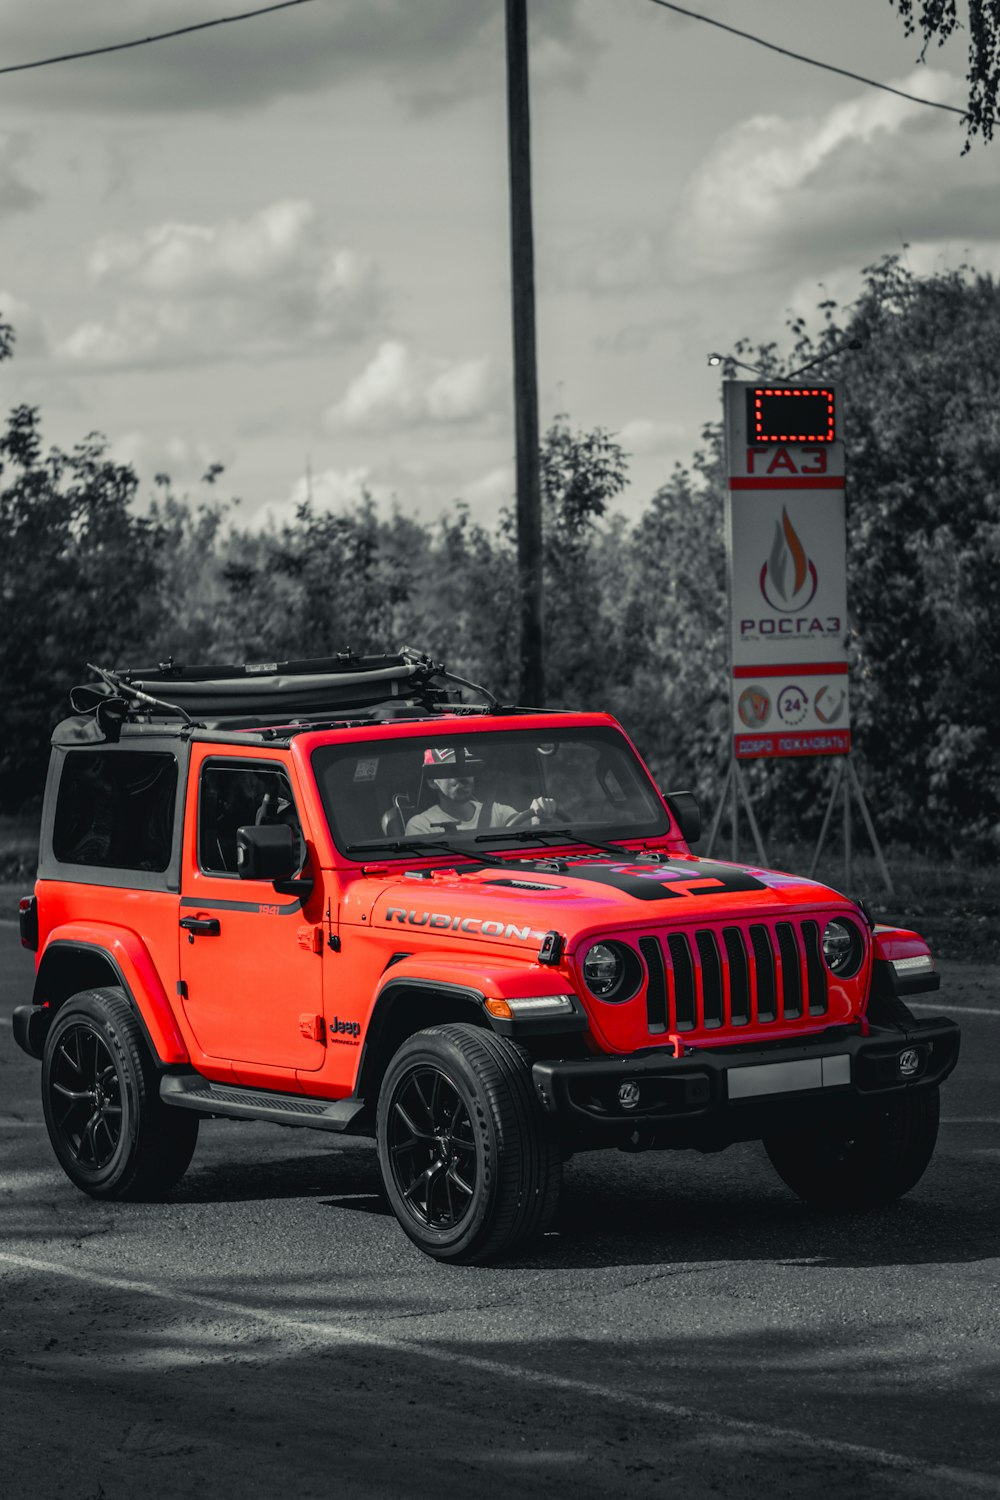 a red jeep parked in a parking lot